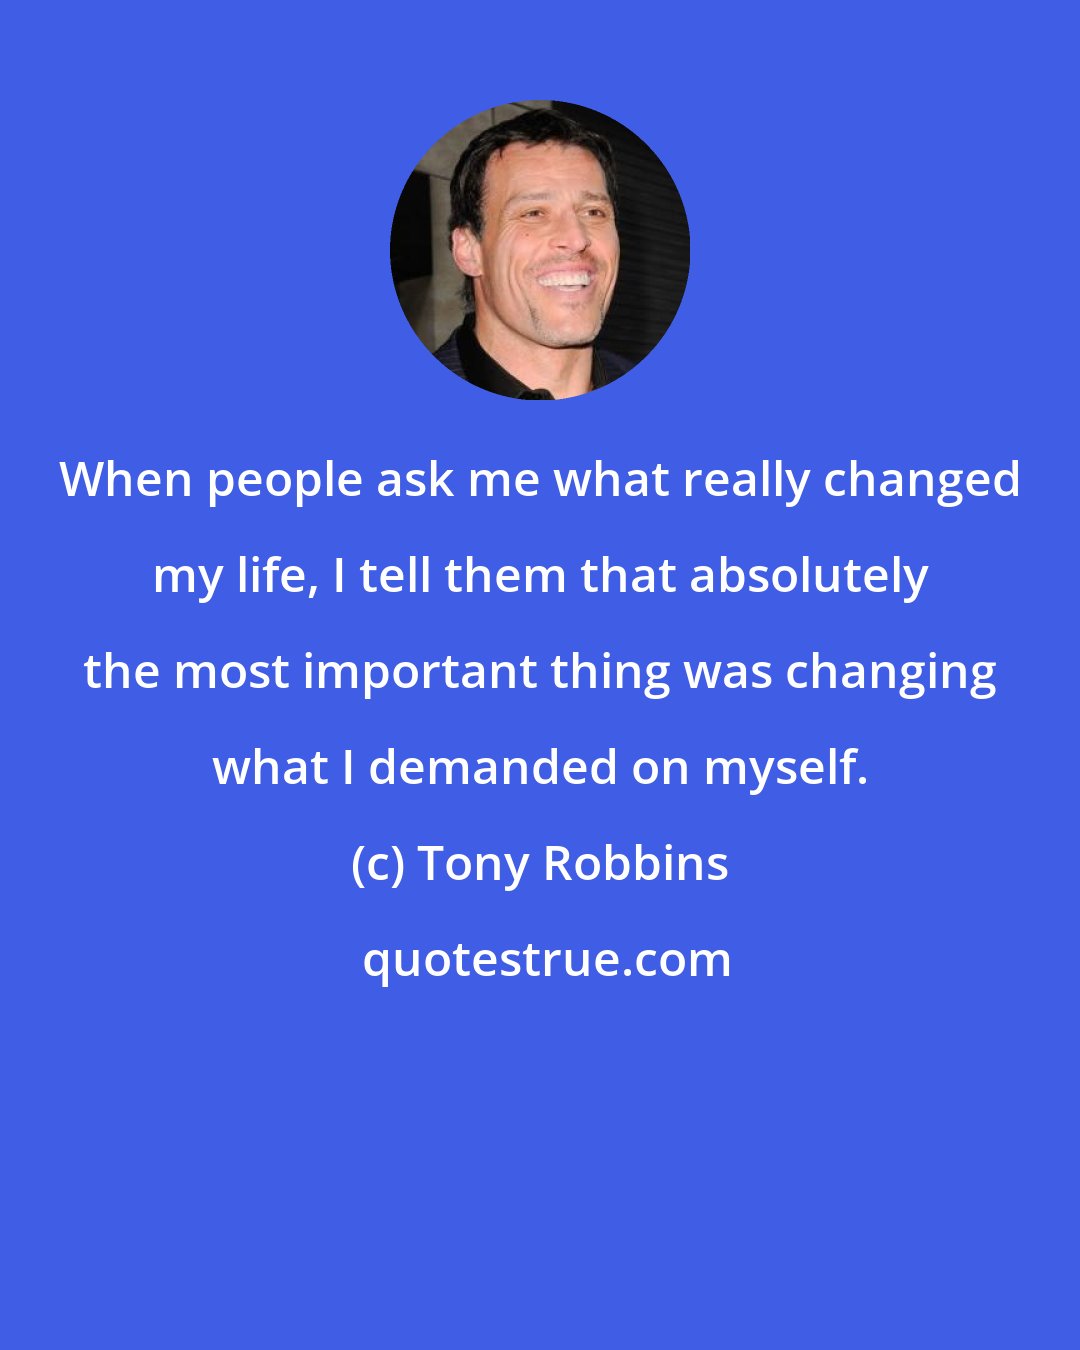 Tony Robbins: When people ask me what really changed my life, I tell them that absolutely the most important thing was changing what I demanded on myself.